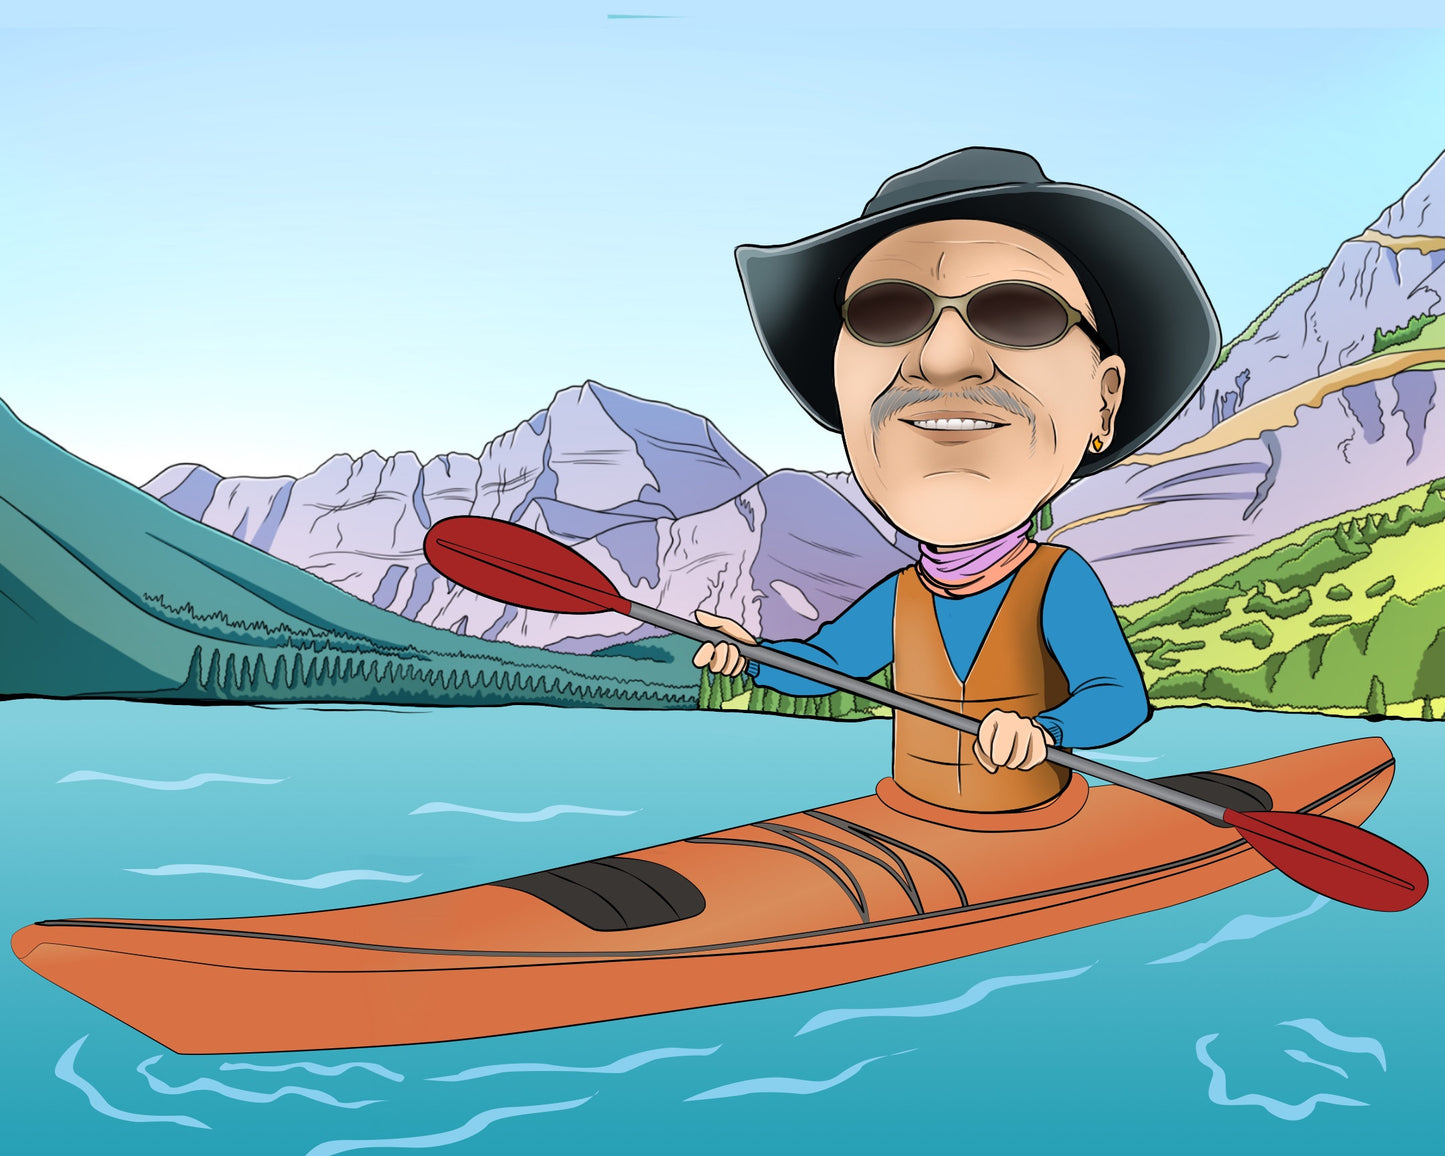 Kayaker Gift - Custom Caricature Portrait From Your Photo/kayaking gifts